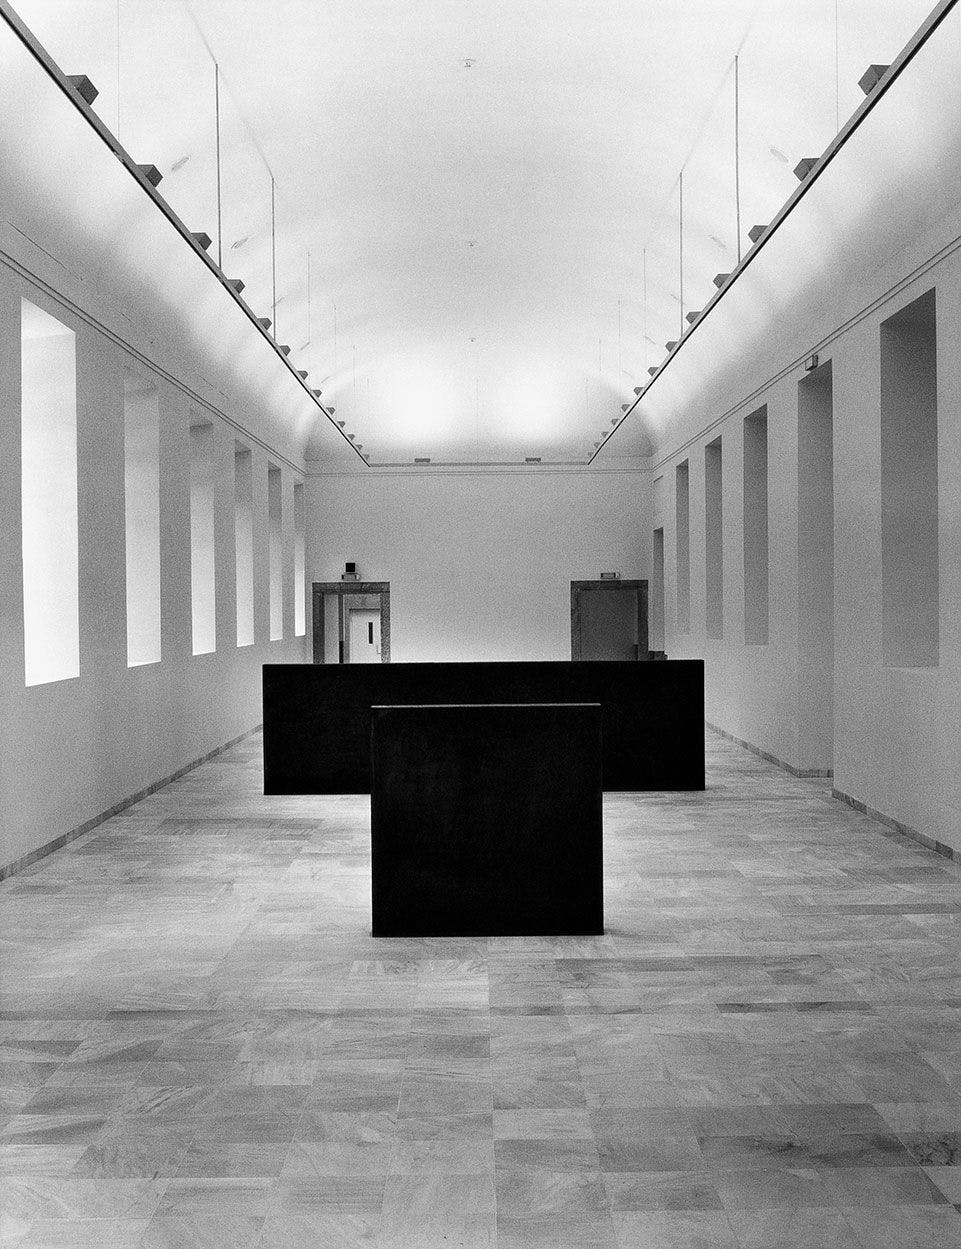 A sculpture by Richard Serra made of four slabs of steel, titled Equal-Parallel: Guernica-Bengasi, dated 1986.